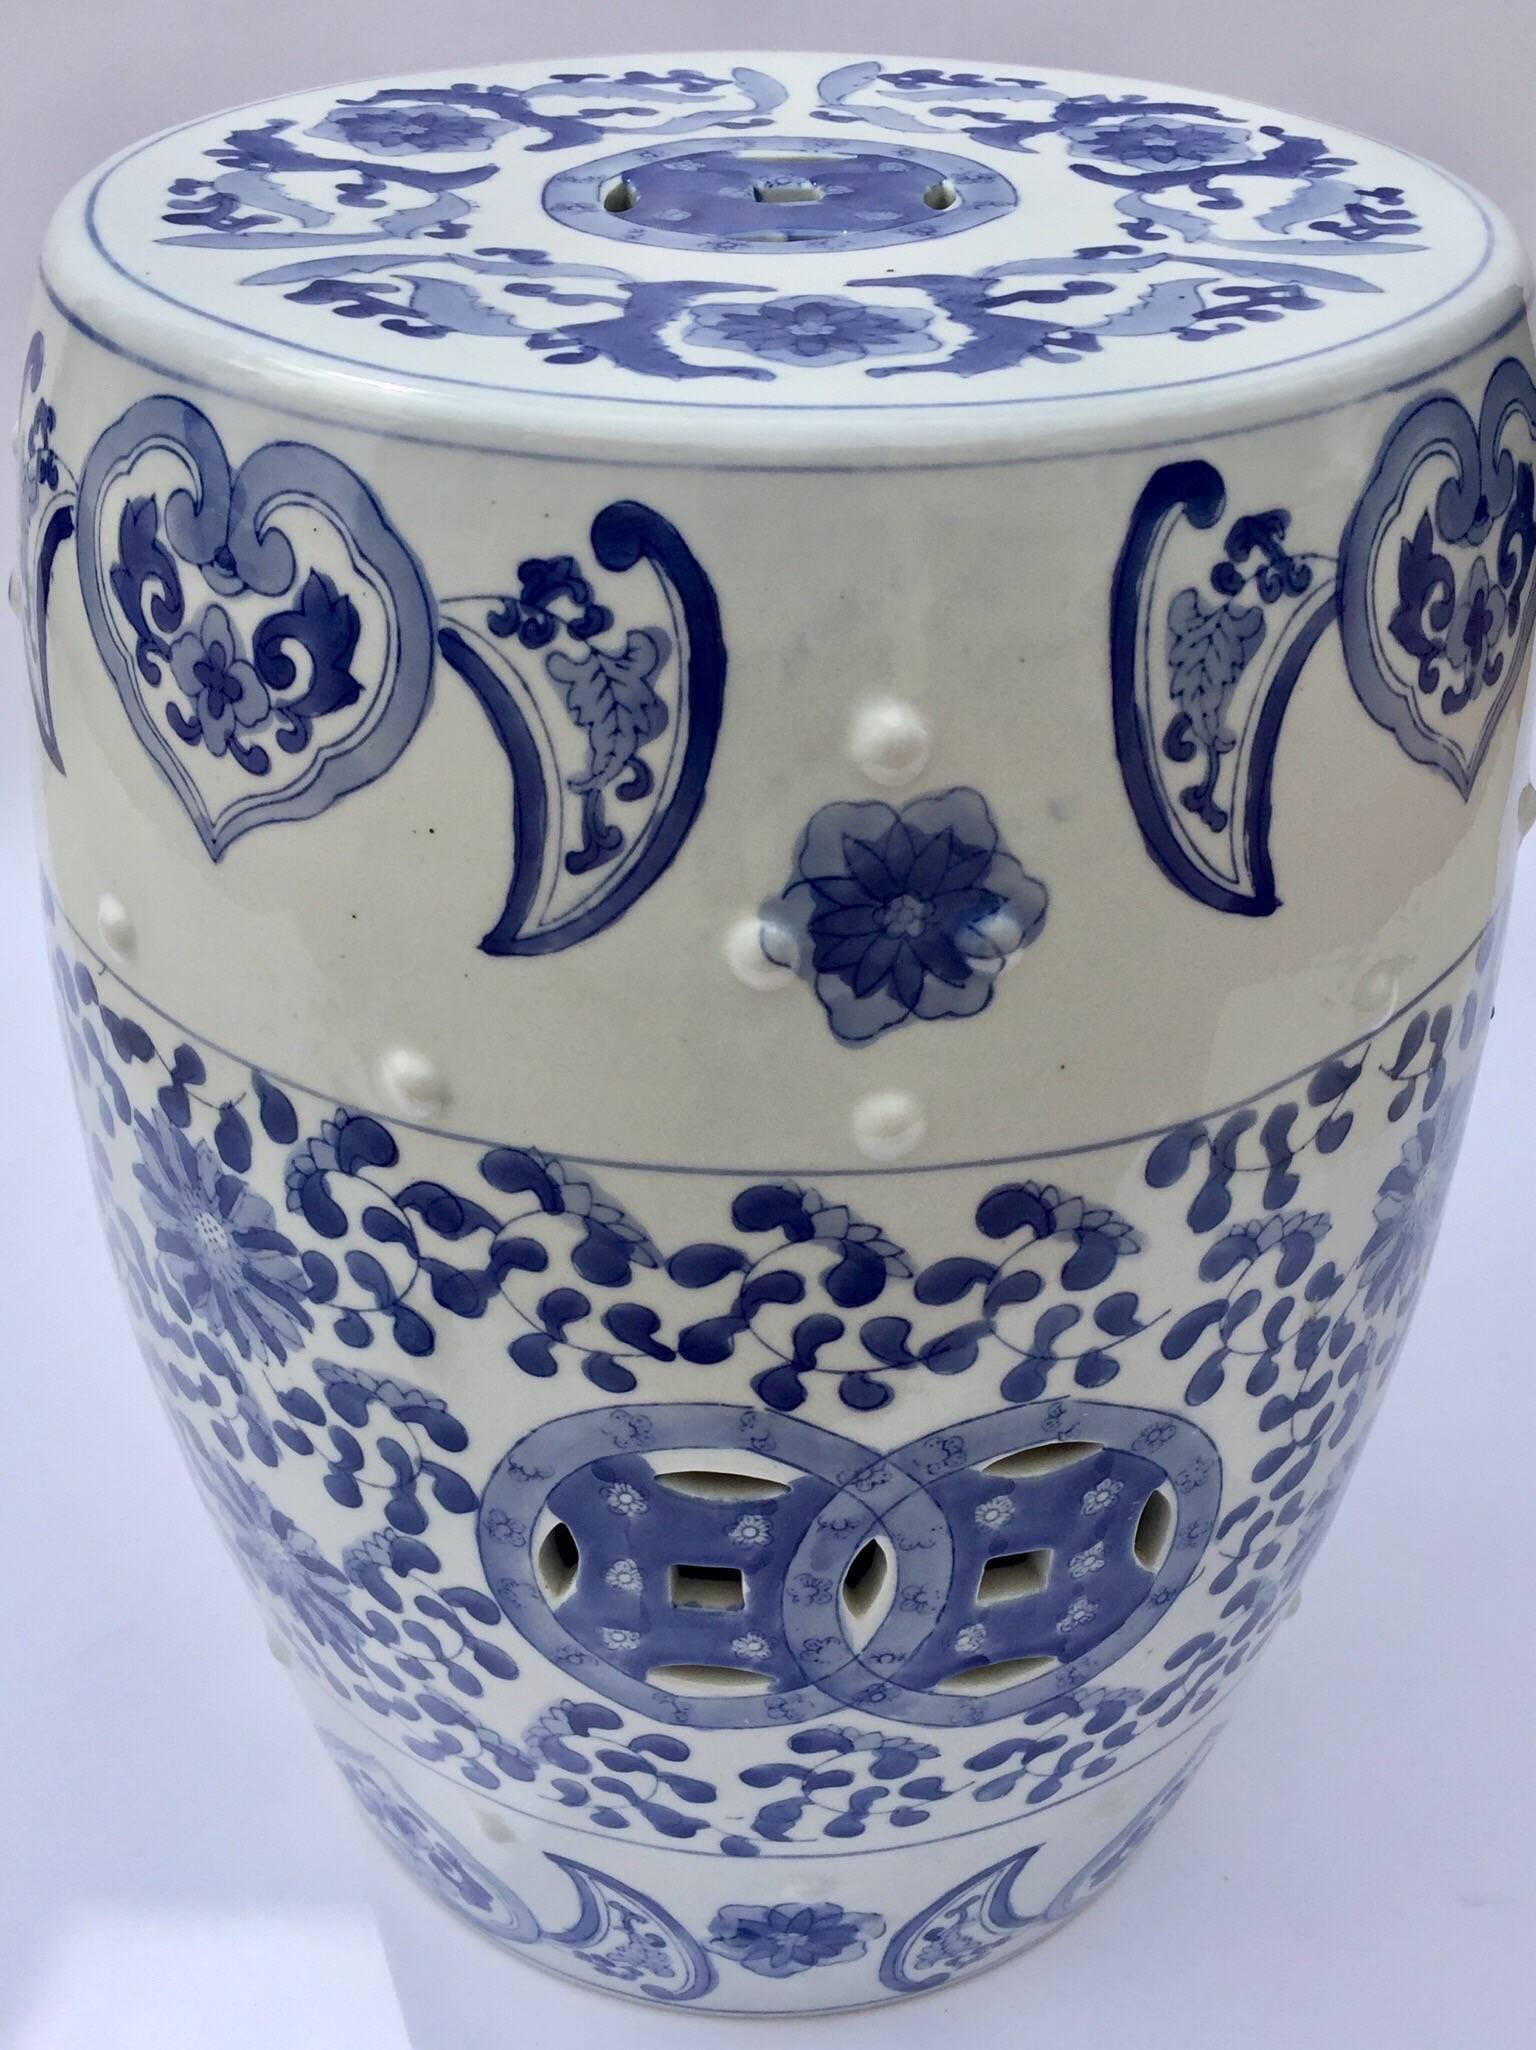 Ceramic Asian Garden Seat in Blue and White Floral Motifs In Excellent Condition For Sale In North Hollywood, CA